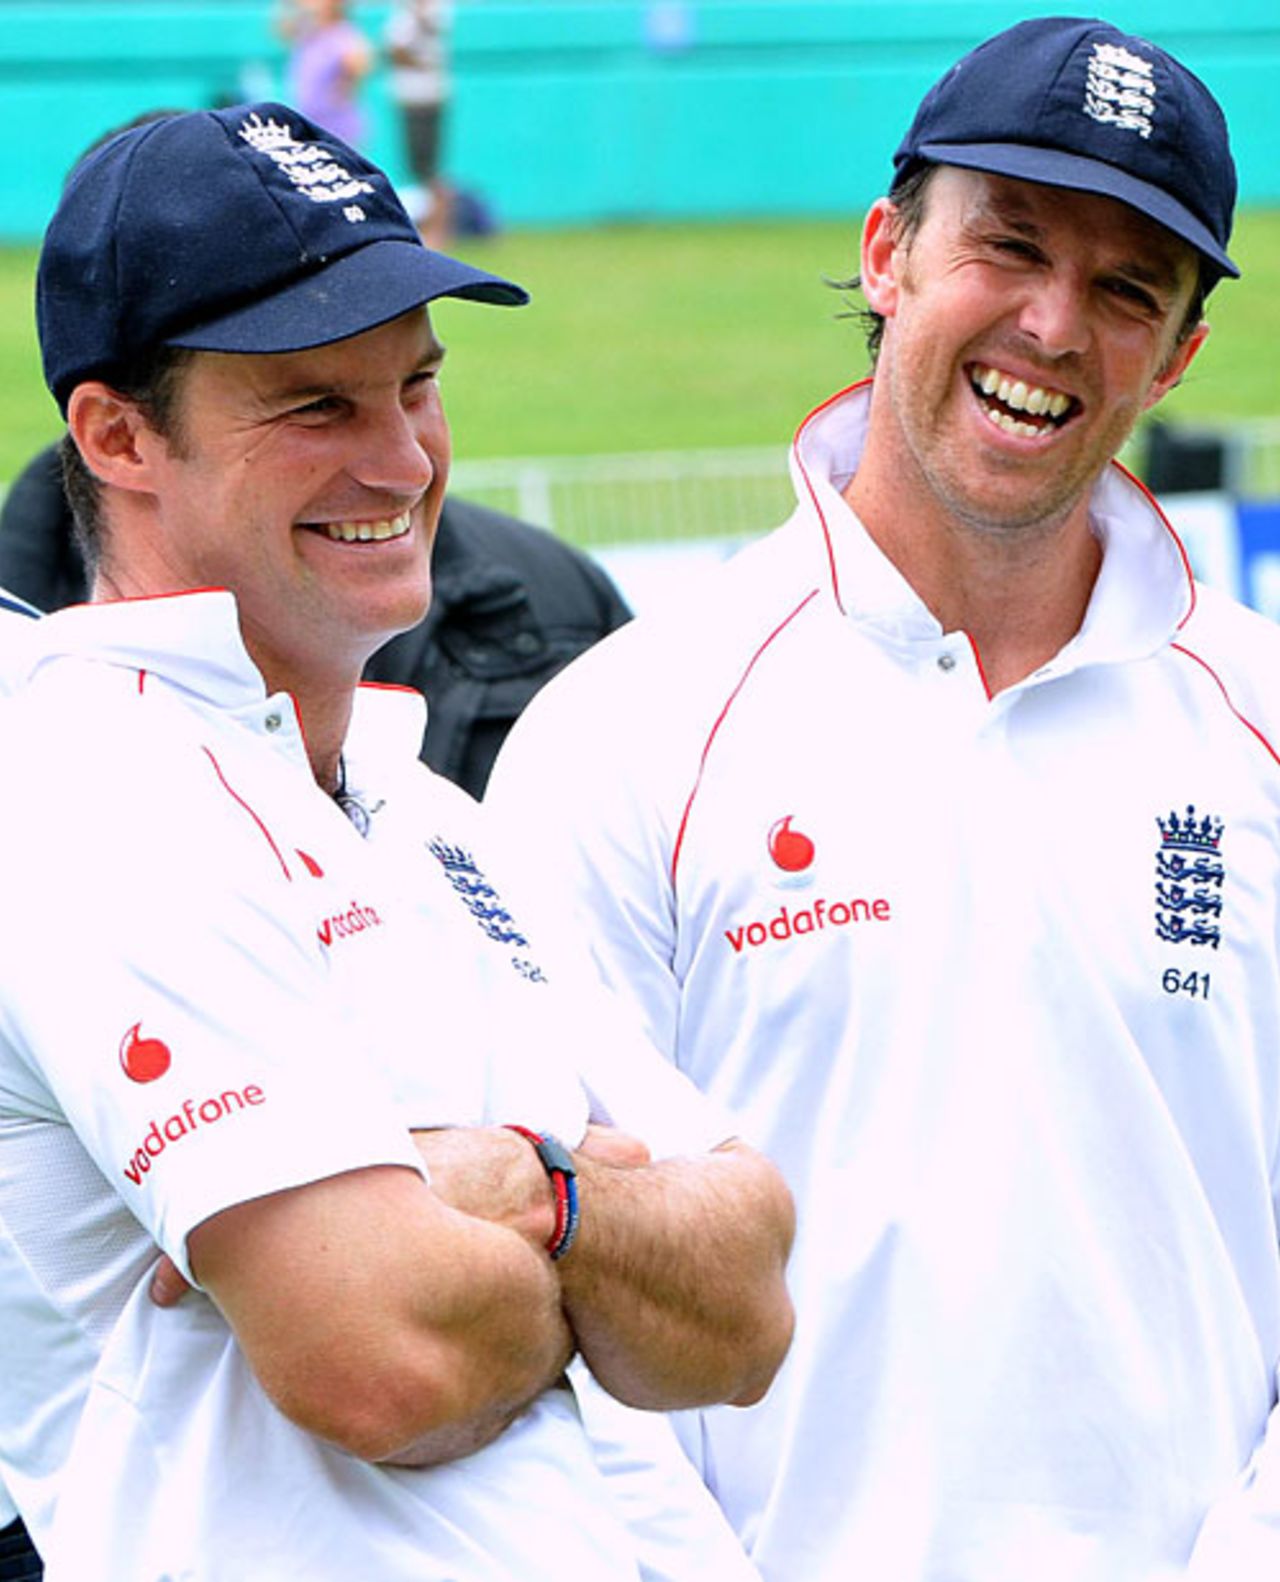 Graeme Swann and Andrew Strauss are all smiles as England ended 2009 in style, South Africa v England, 2nd Test, Durban, December 30, 2009 